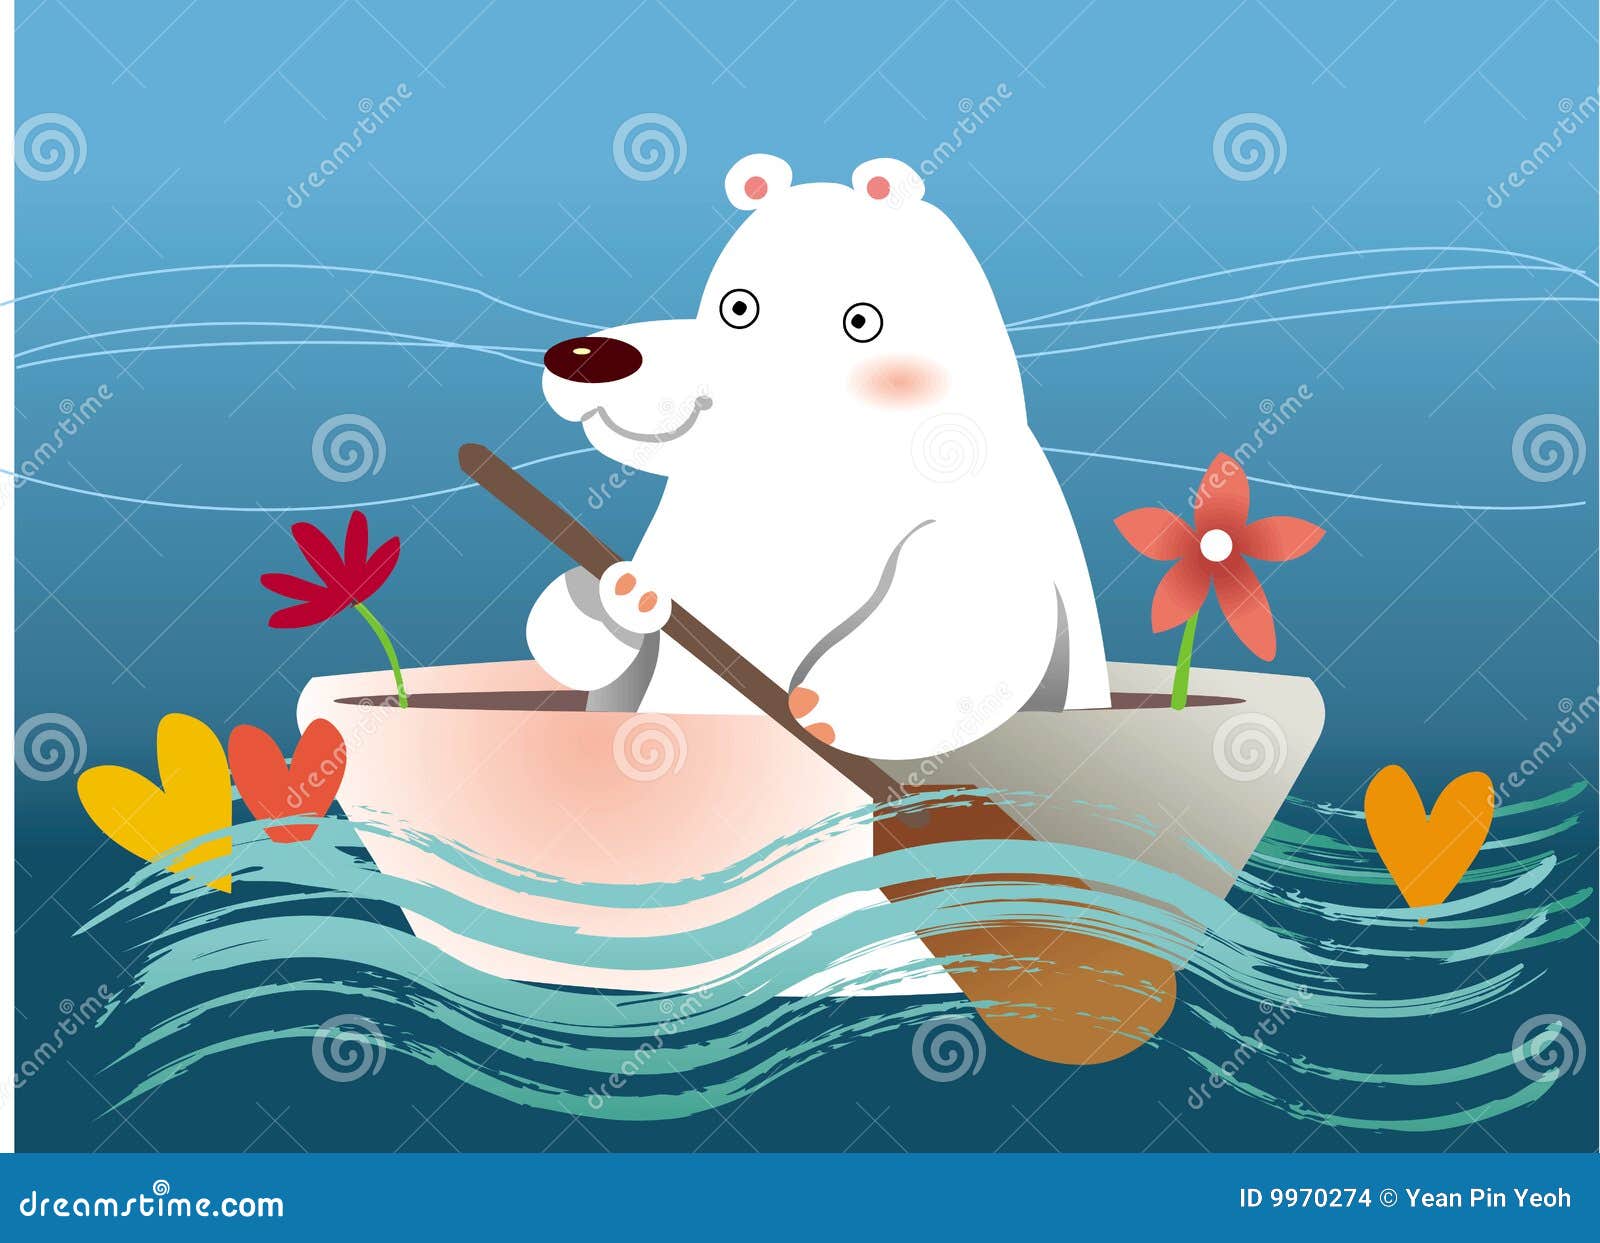 Bear Row Boat Stock Images - Image: 9970274